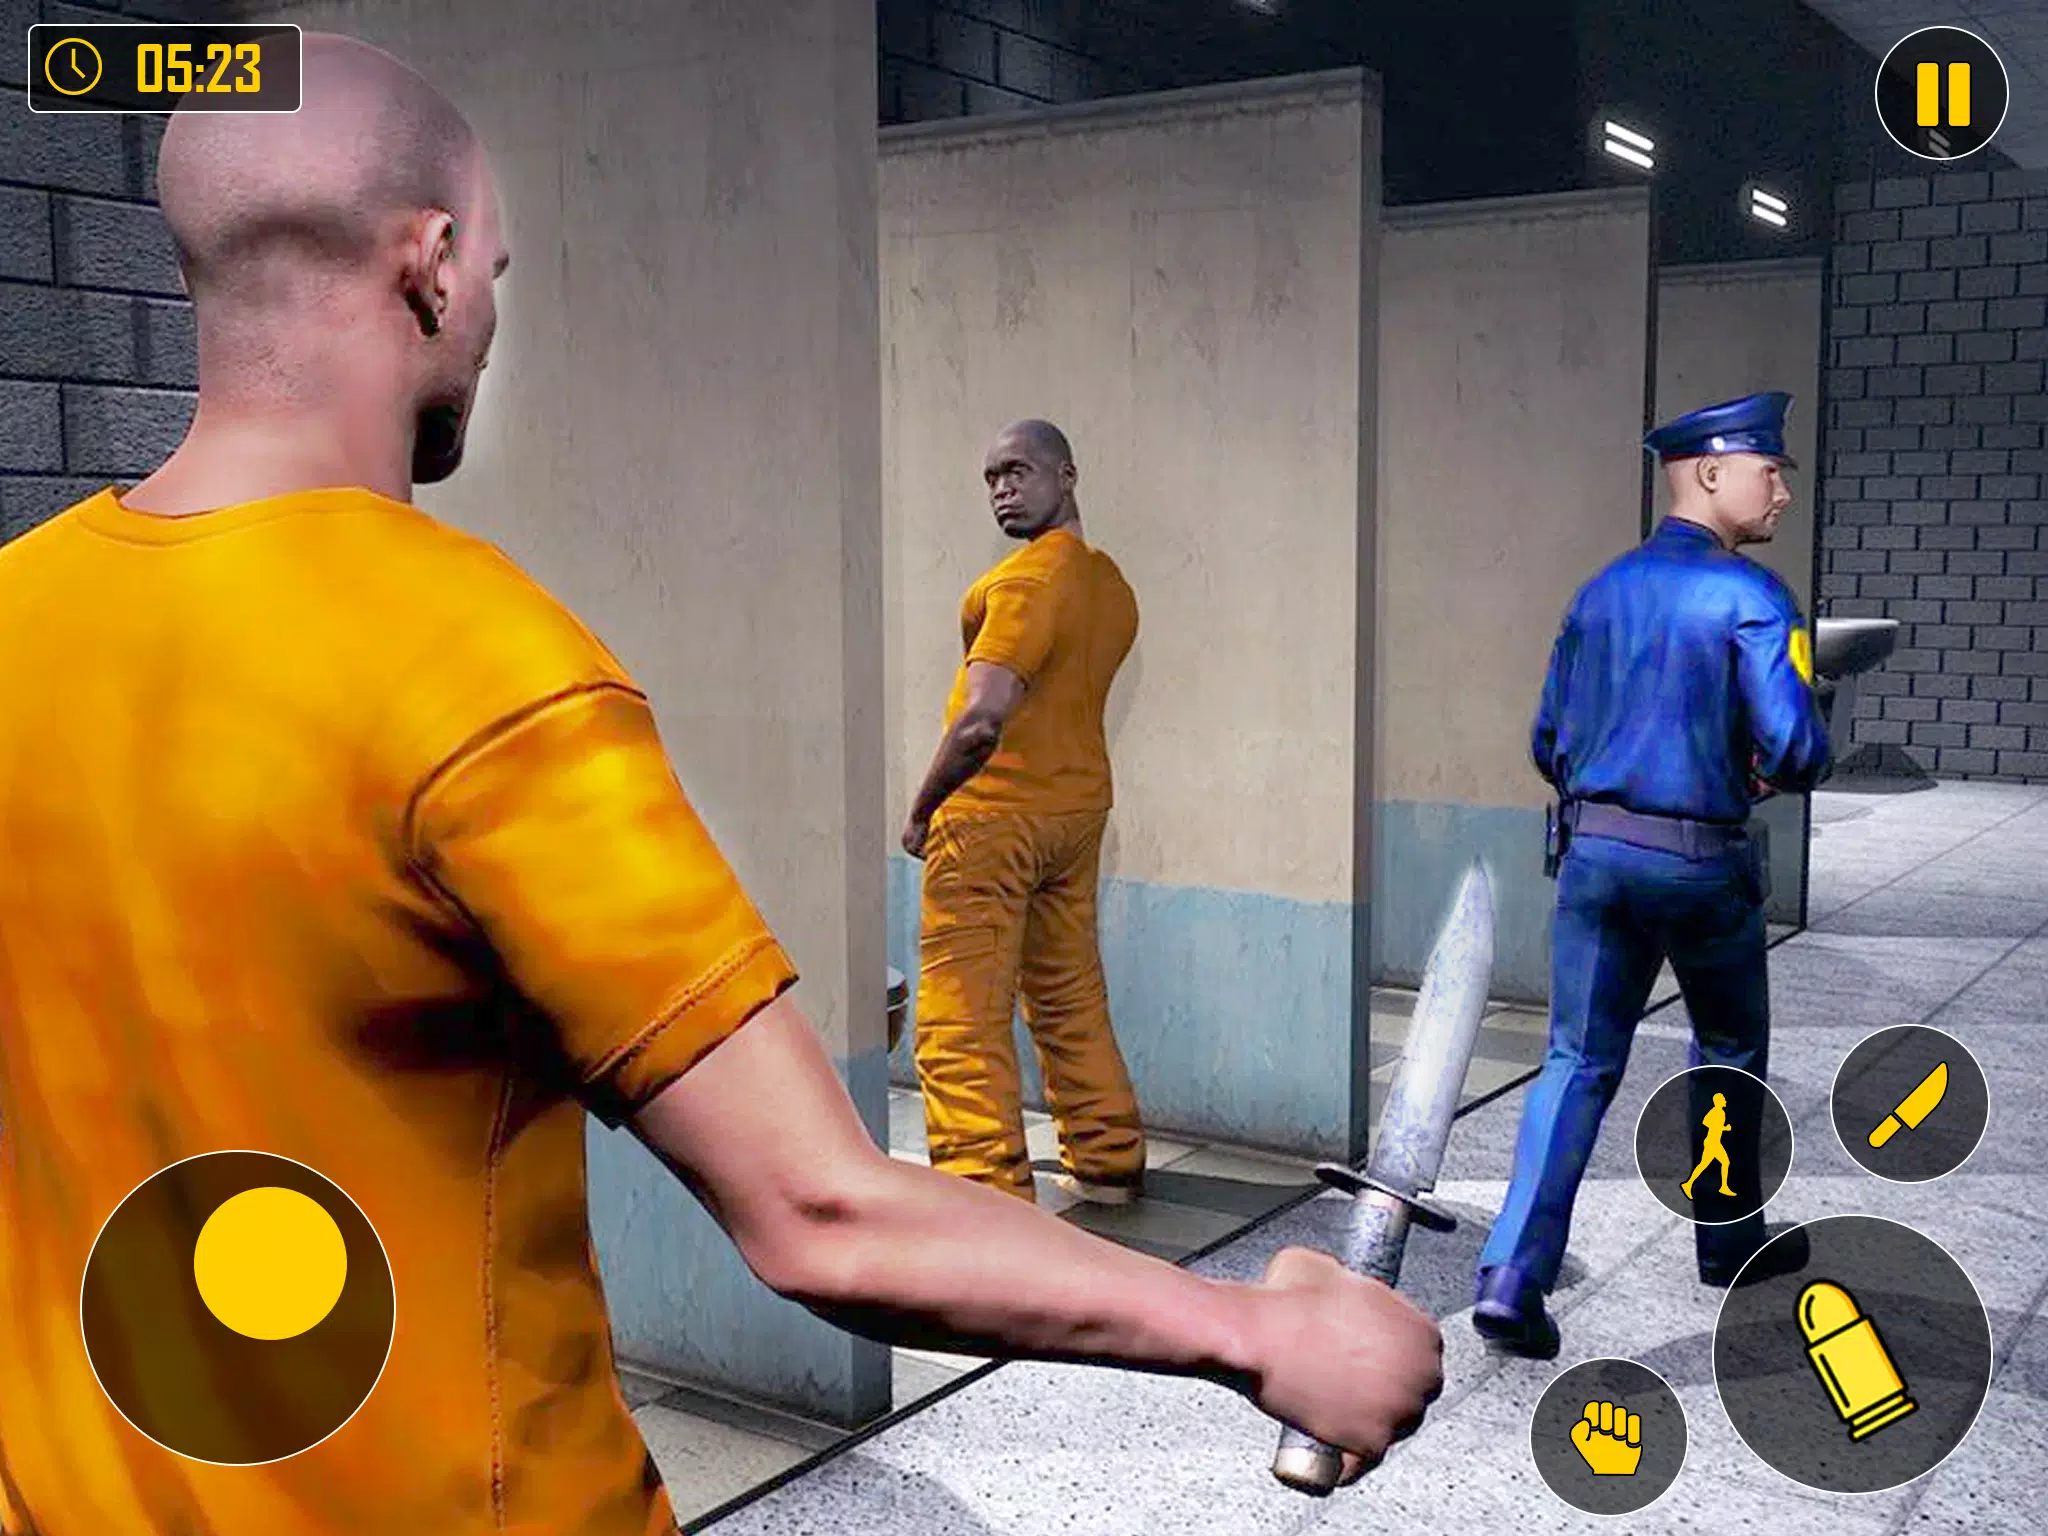 How to Download Prison Escape for Android